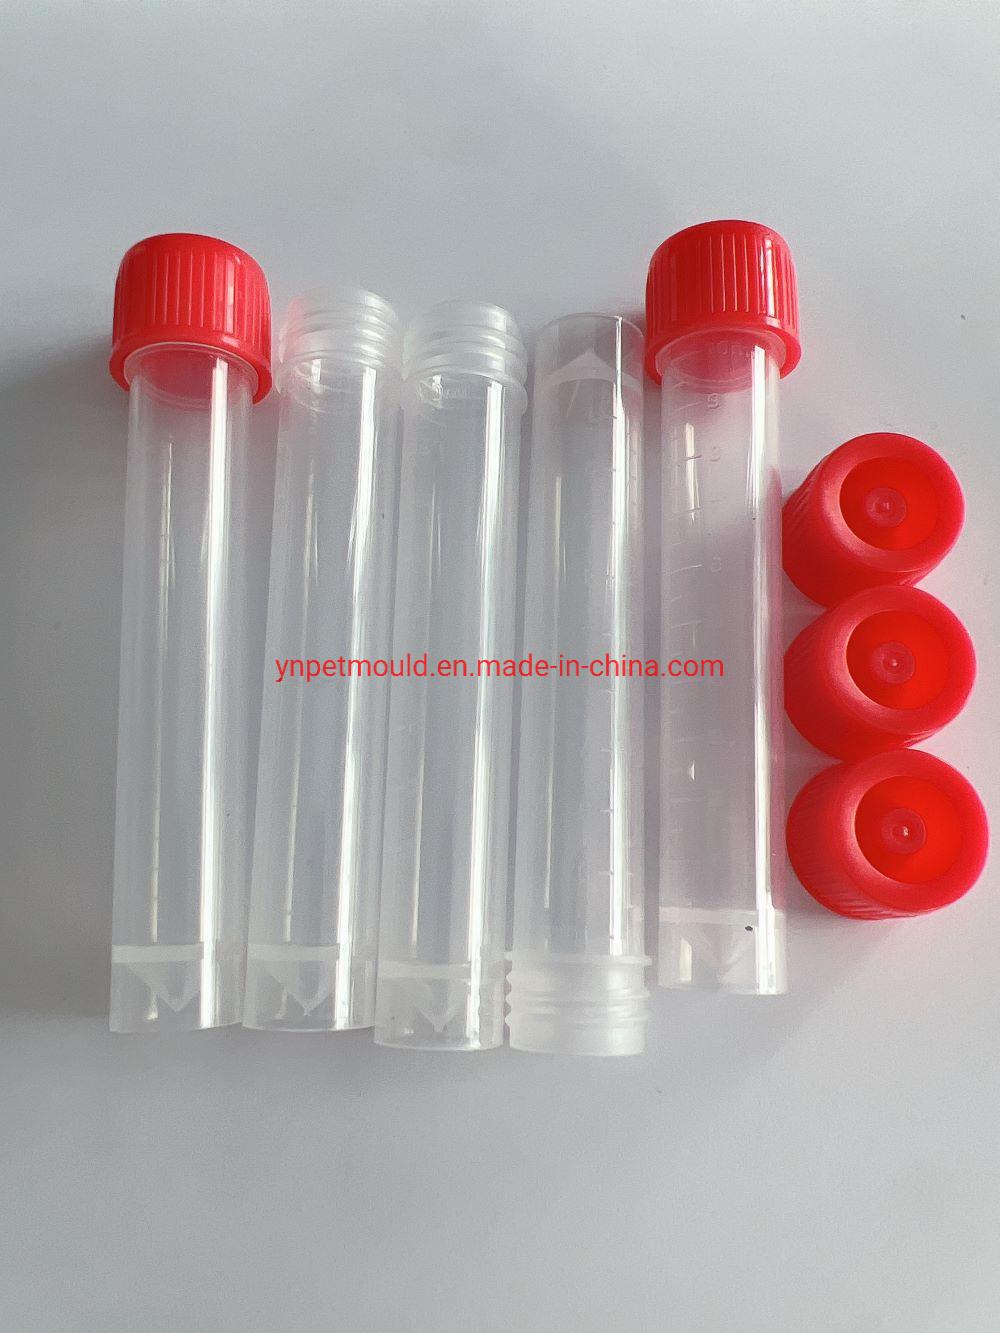 10ml Virus Tube Can Be Available